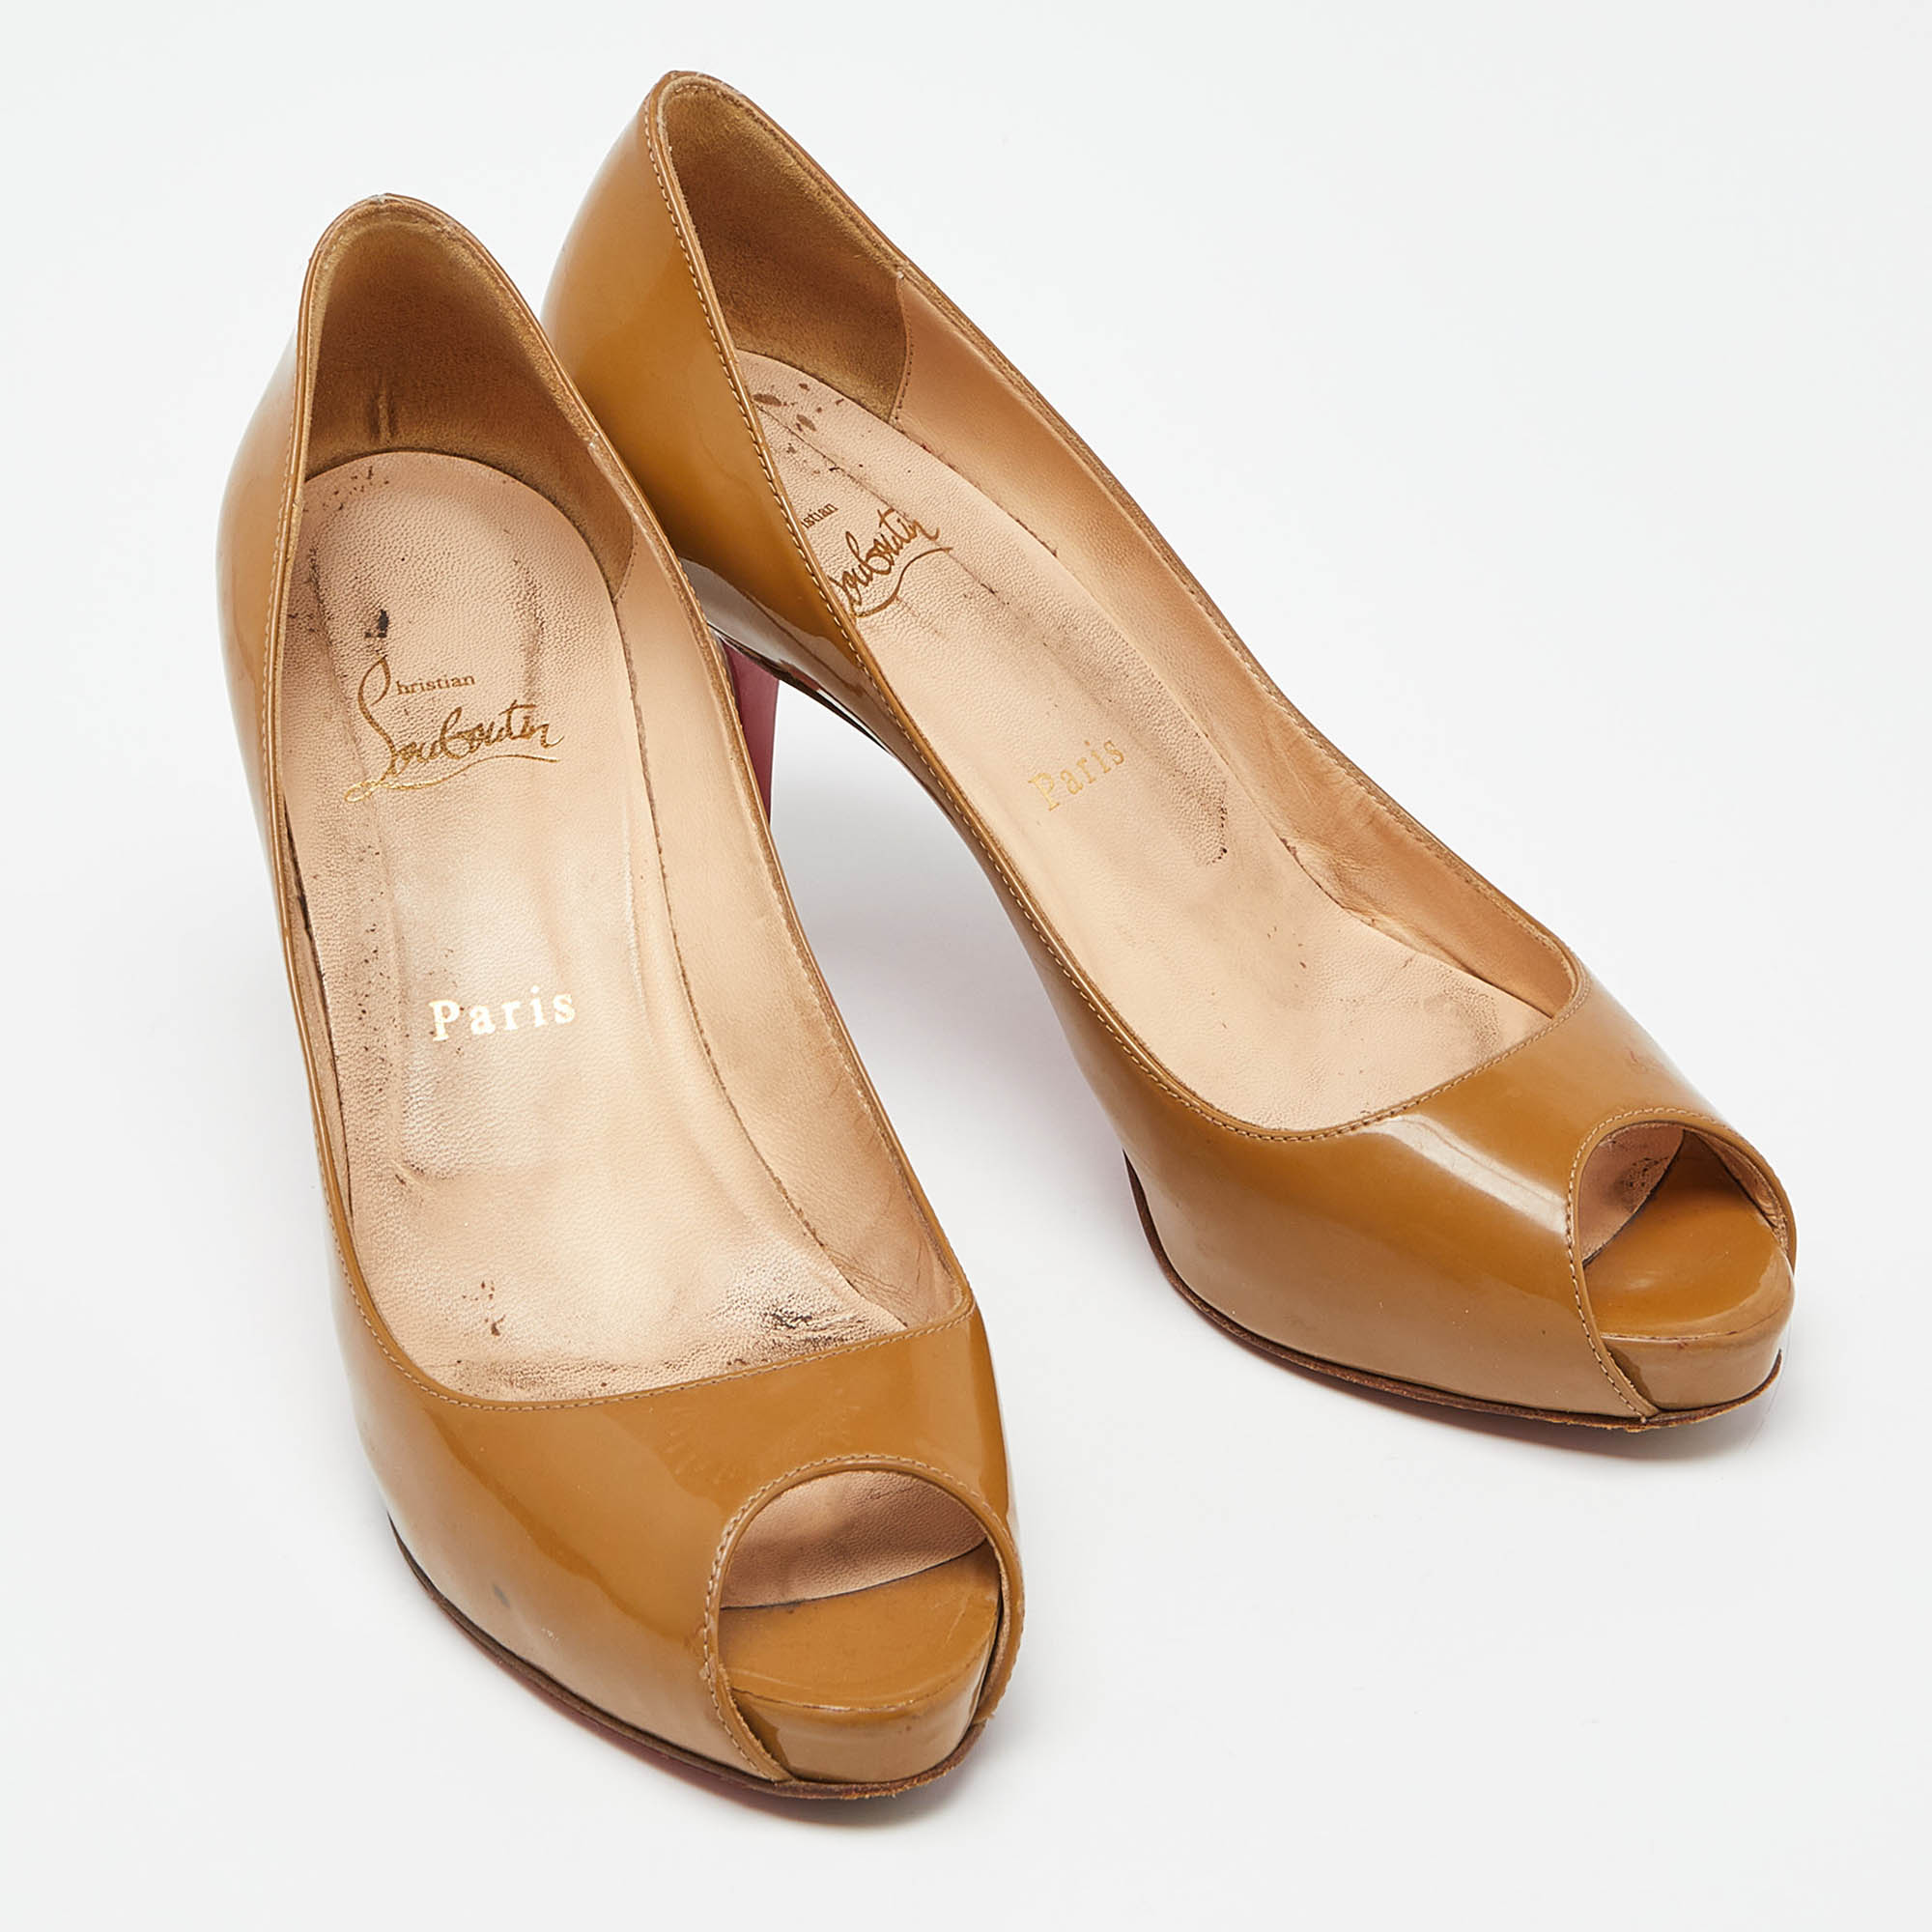 Christian Louboutin Beige Patent Leather Very Prive Pumps Size 38.5